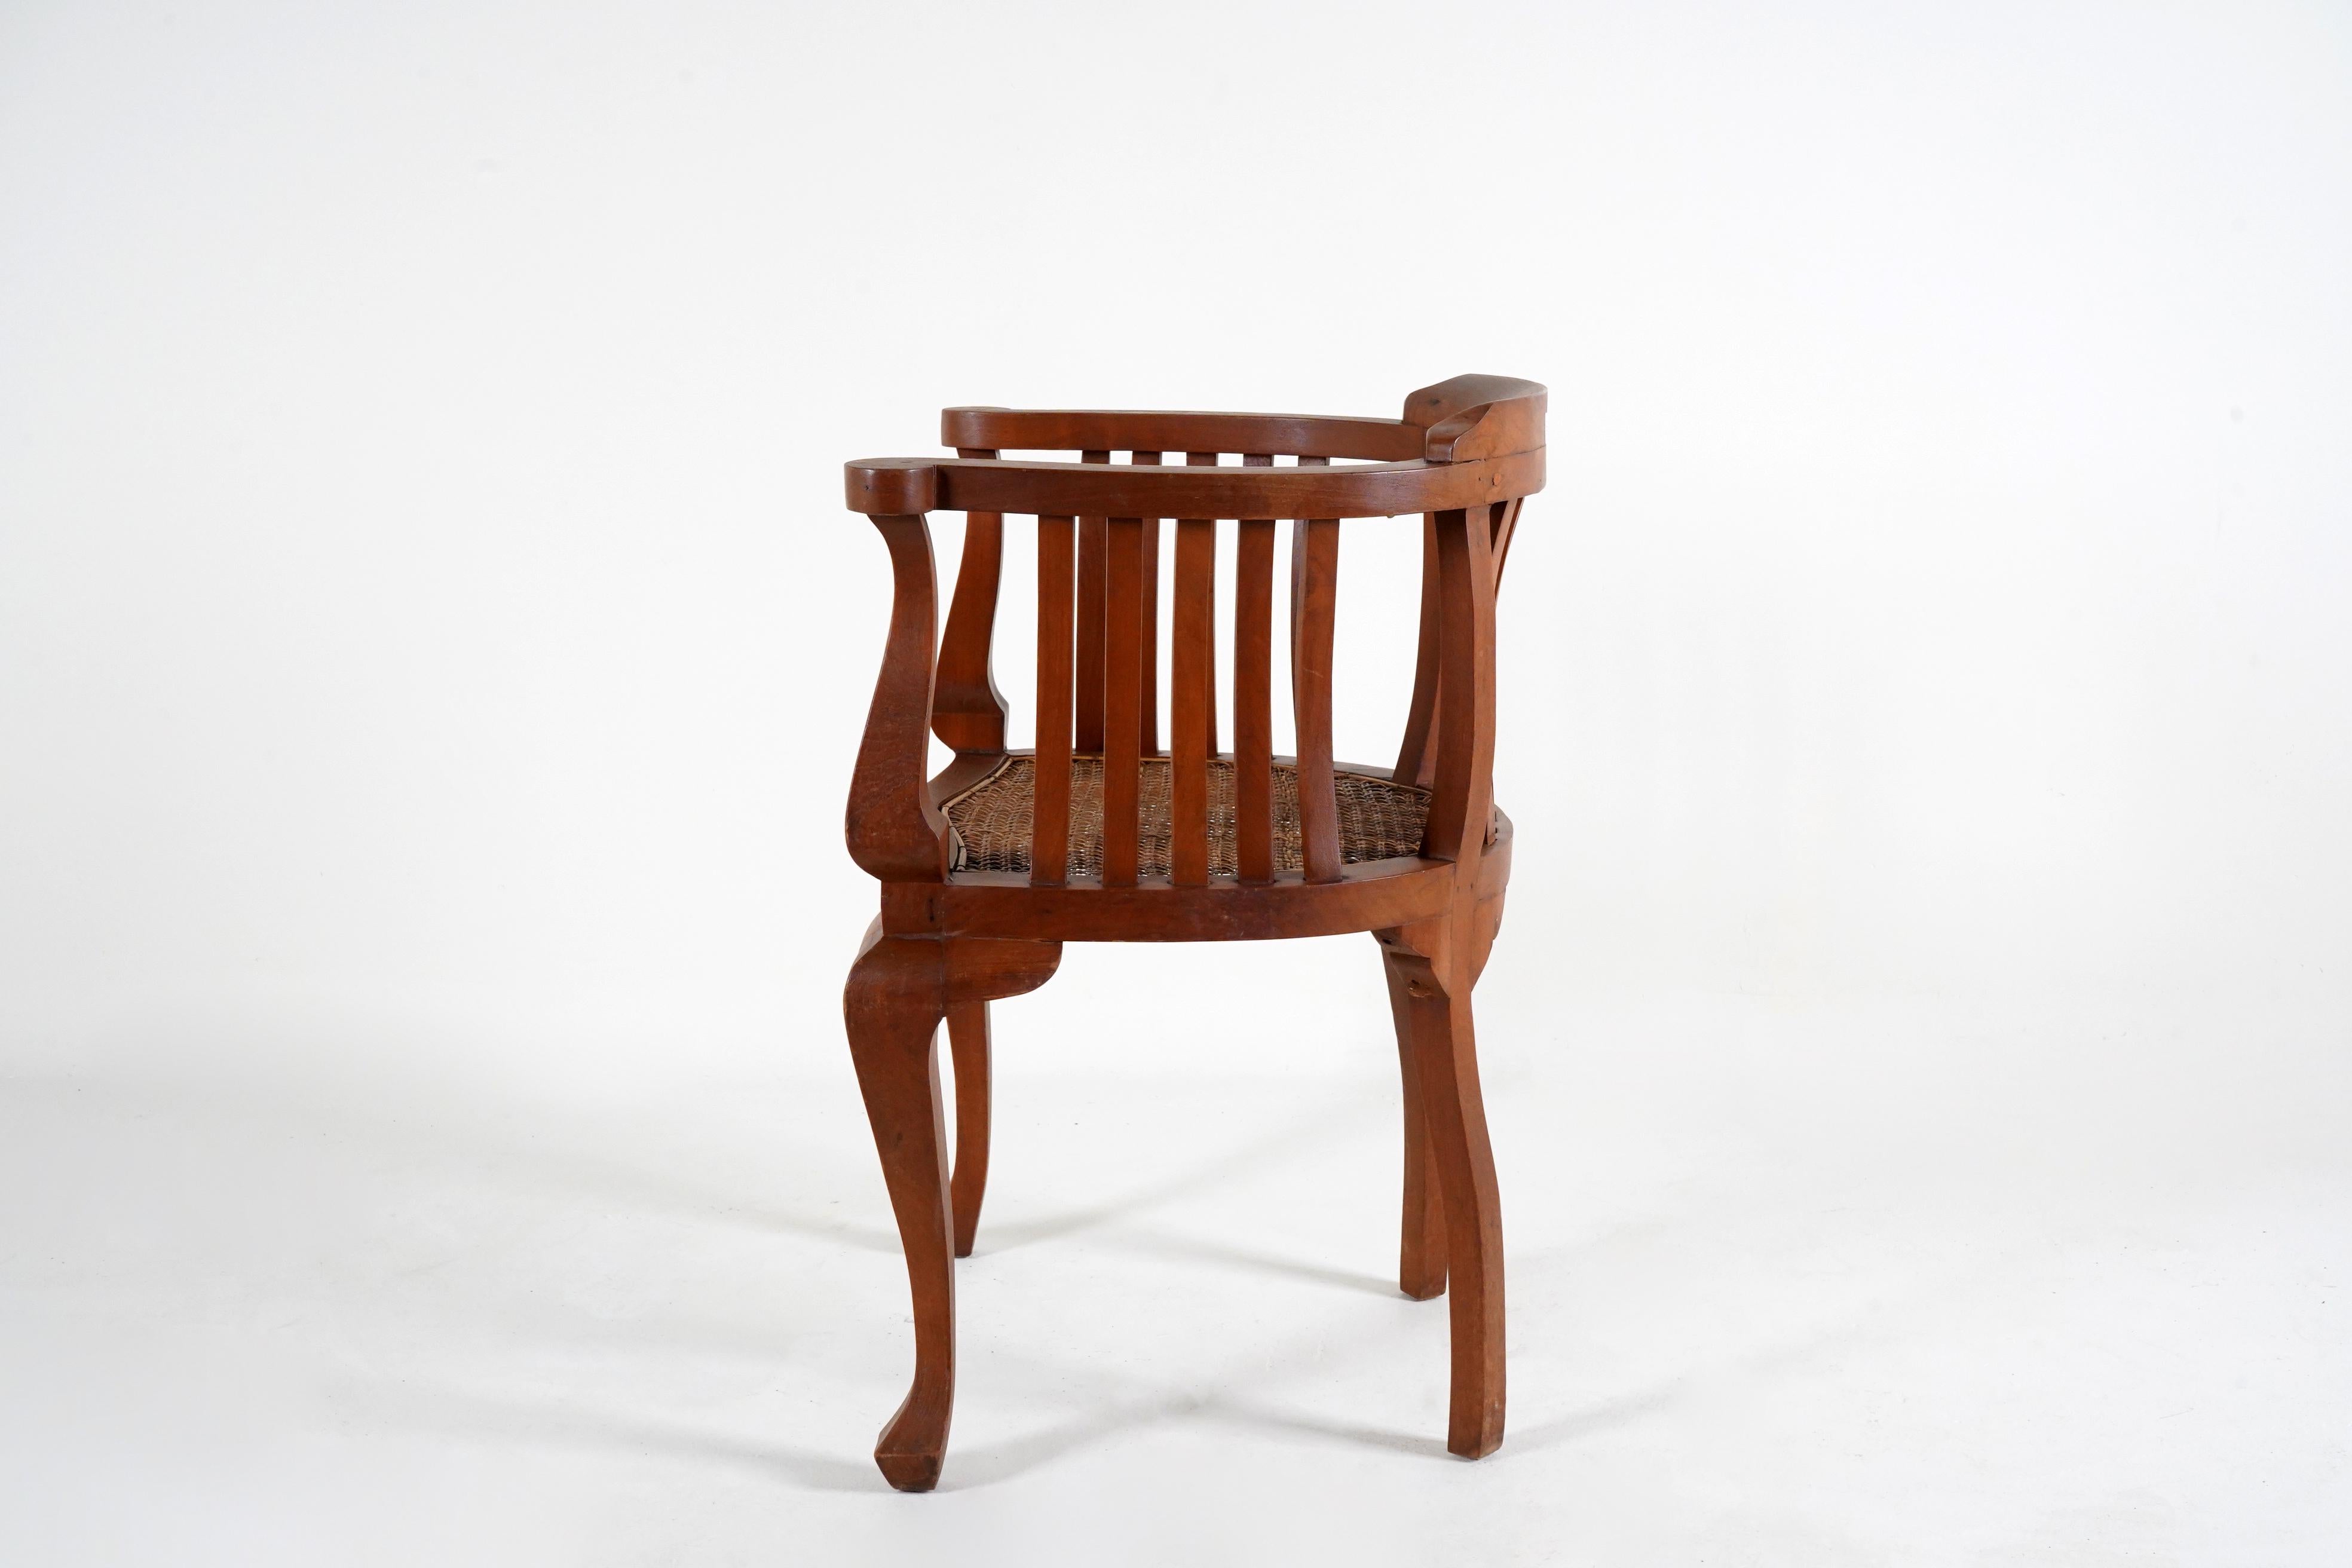 These stylish British Raj armchairs are hand carved from teak and fitted with woven rattan seats. The cabriole legs and arms are graceful and beautiful from every angle. The barrel style back is very comfortable and the woven seat provides